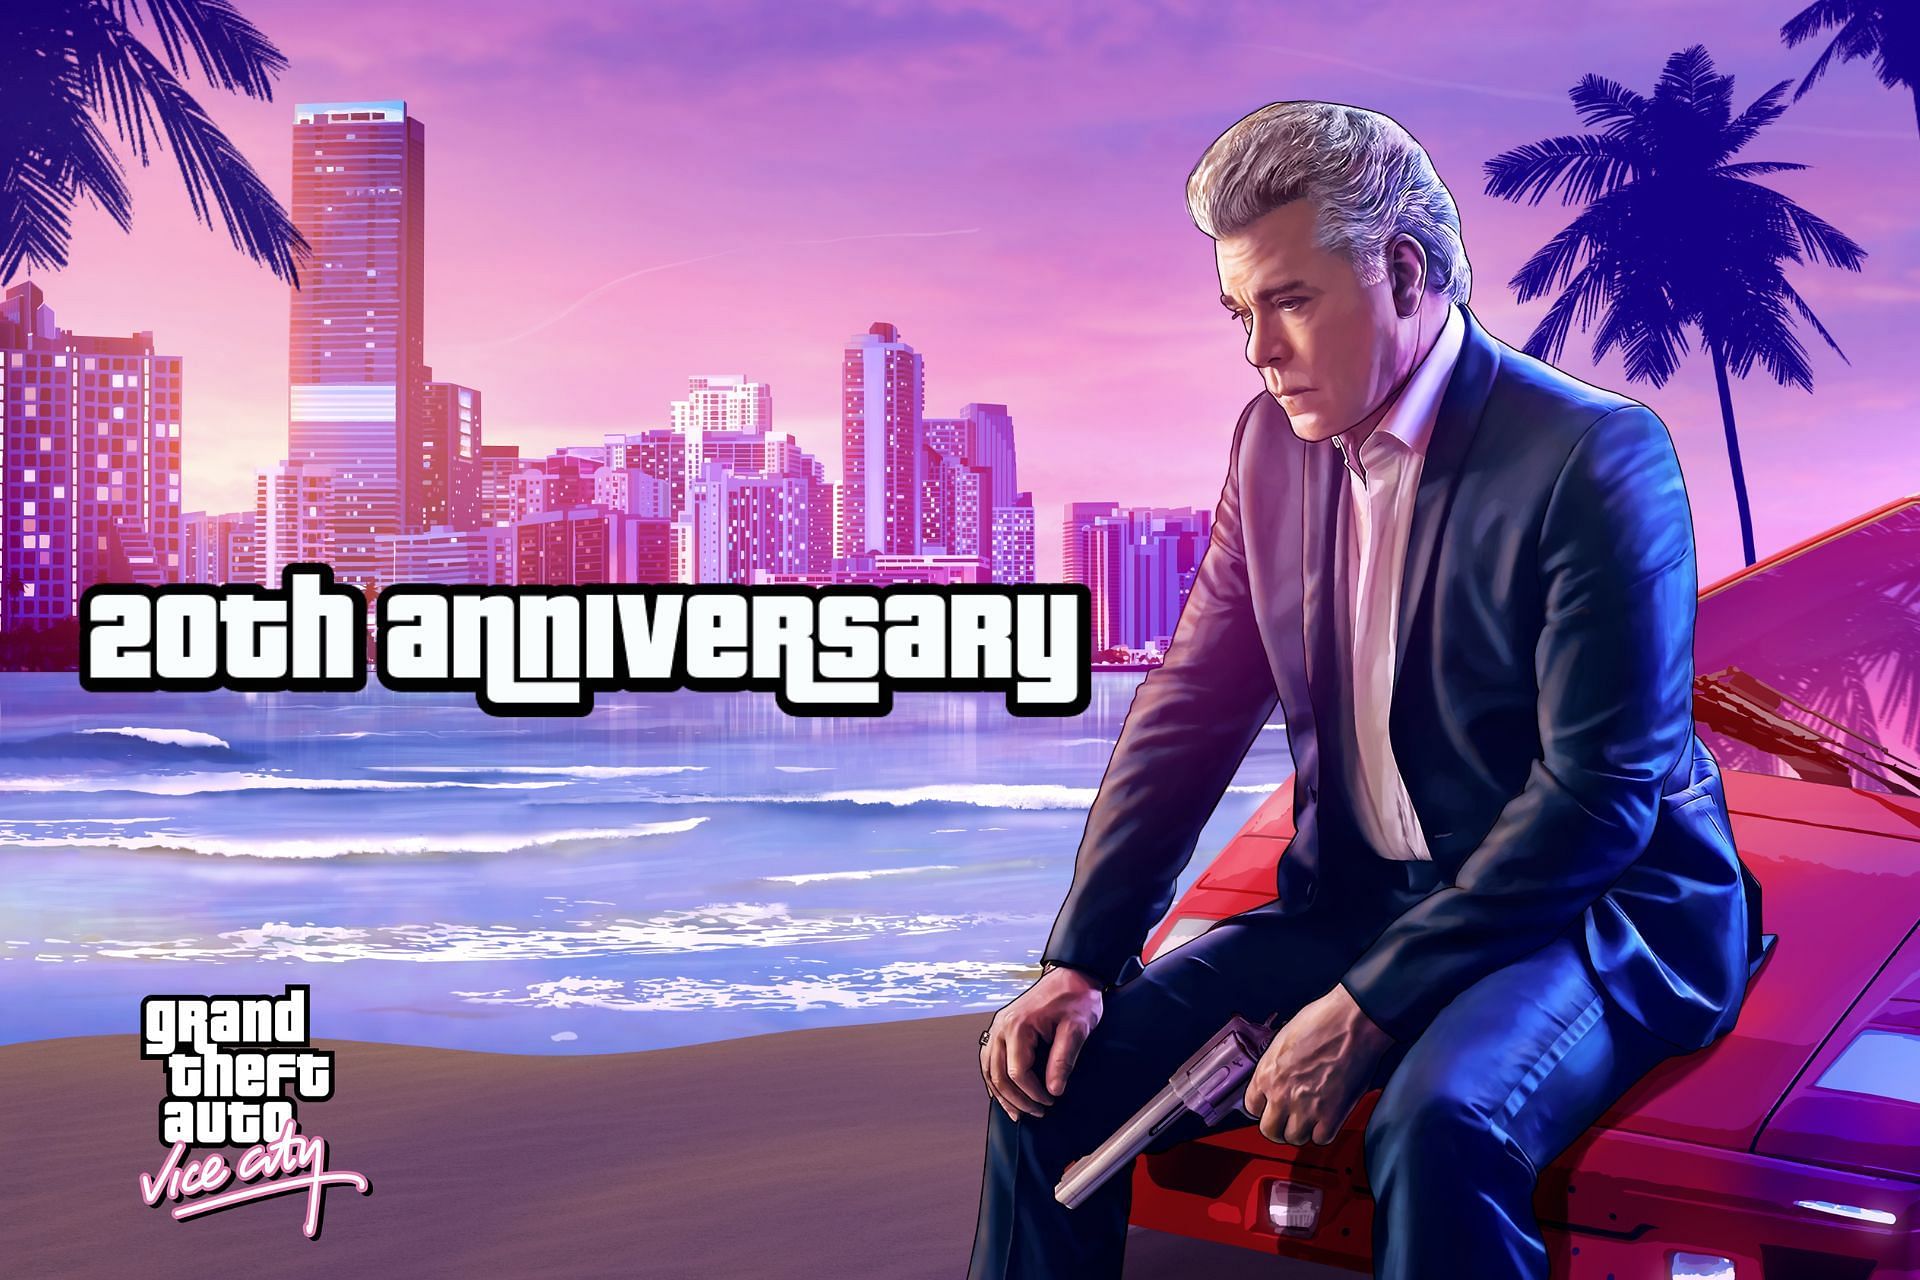 GTA fans expressed their displeasure with Rockstar for ignoring Vice City